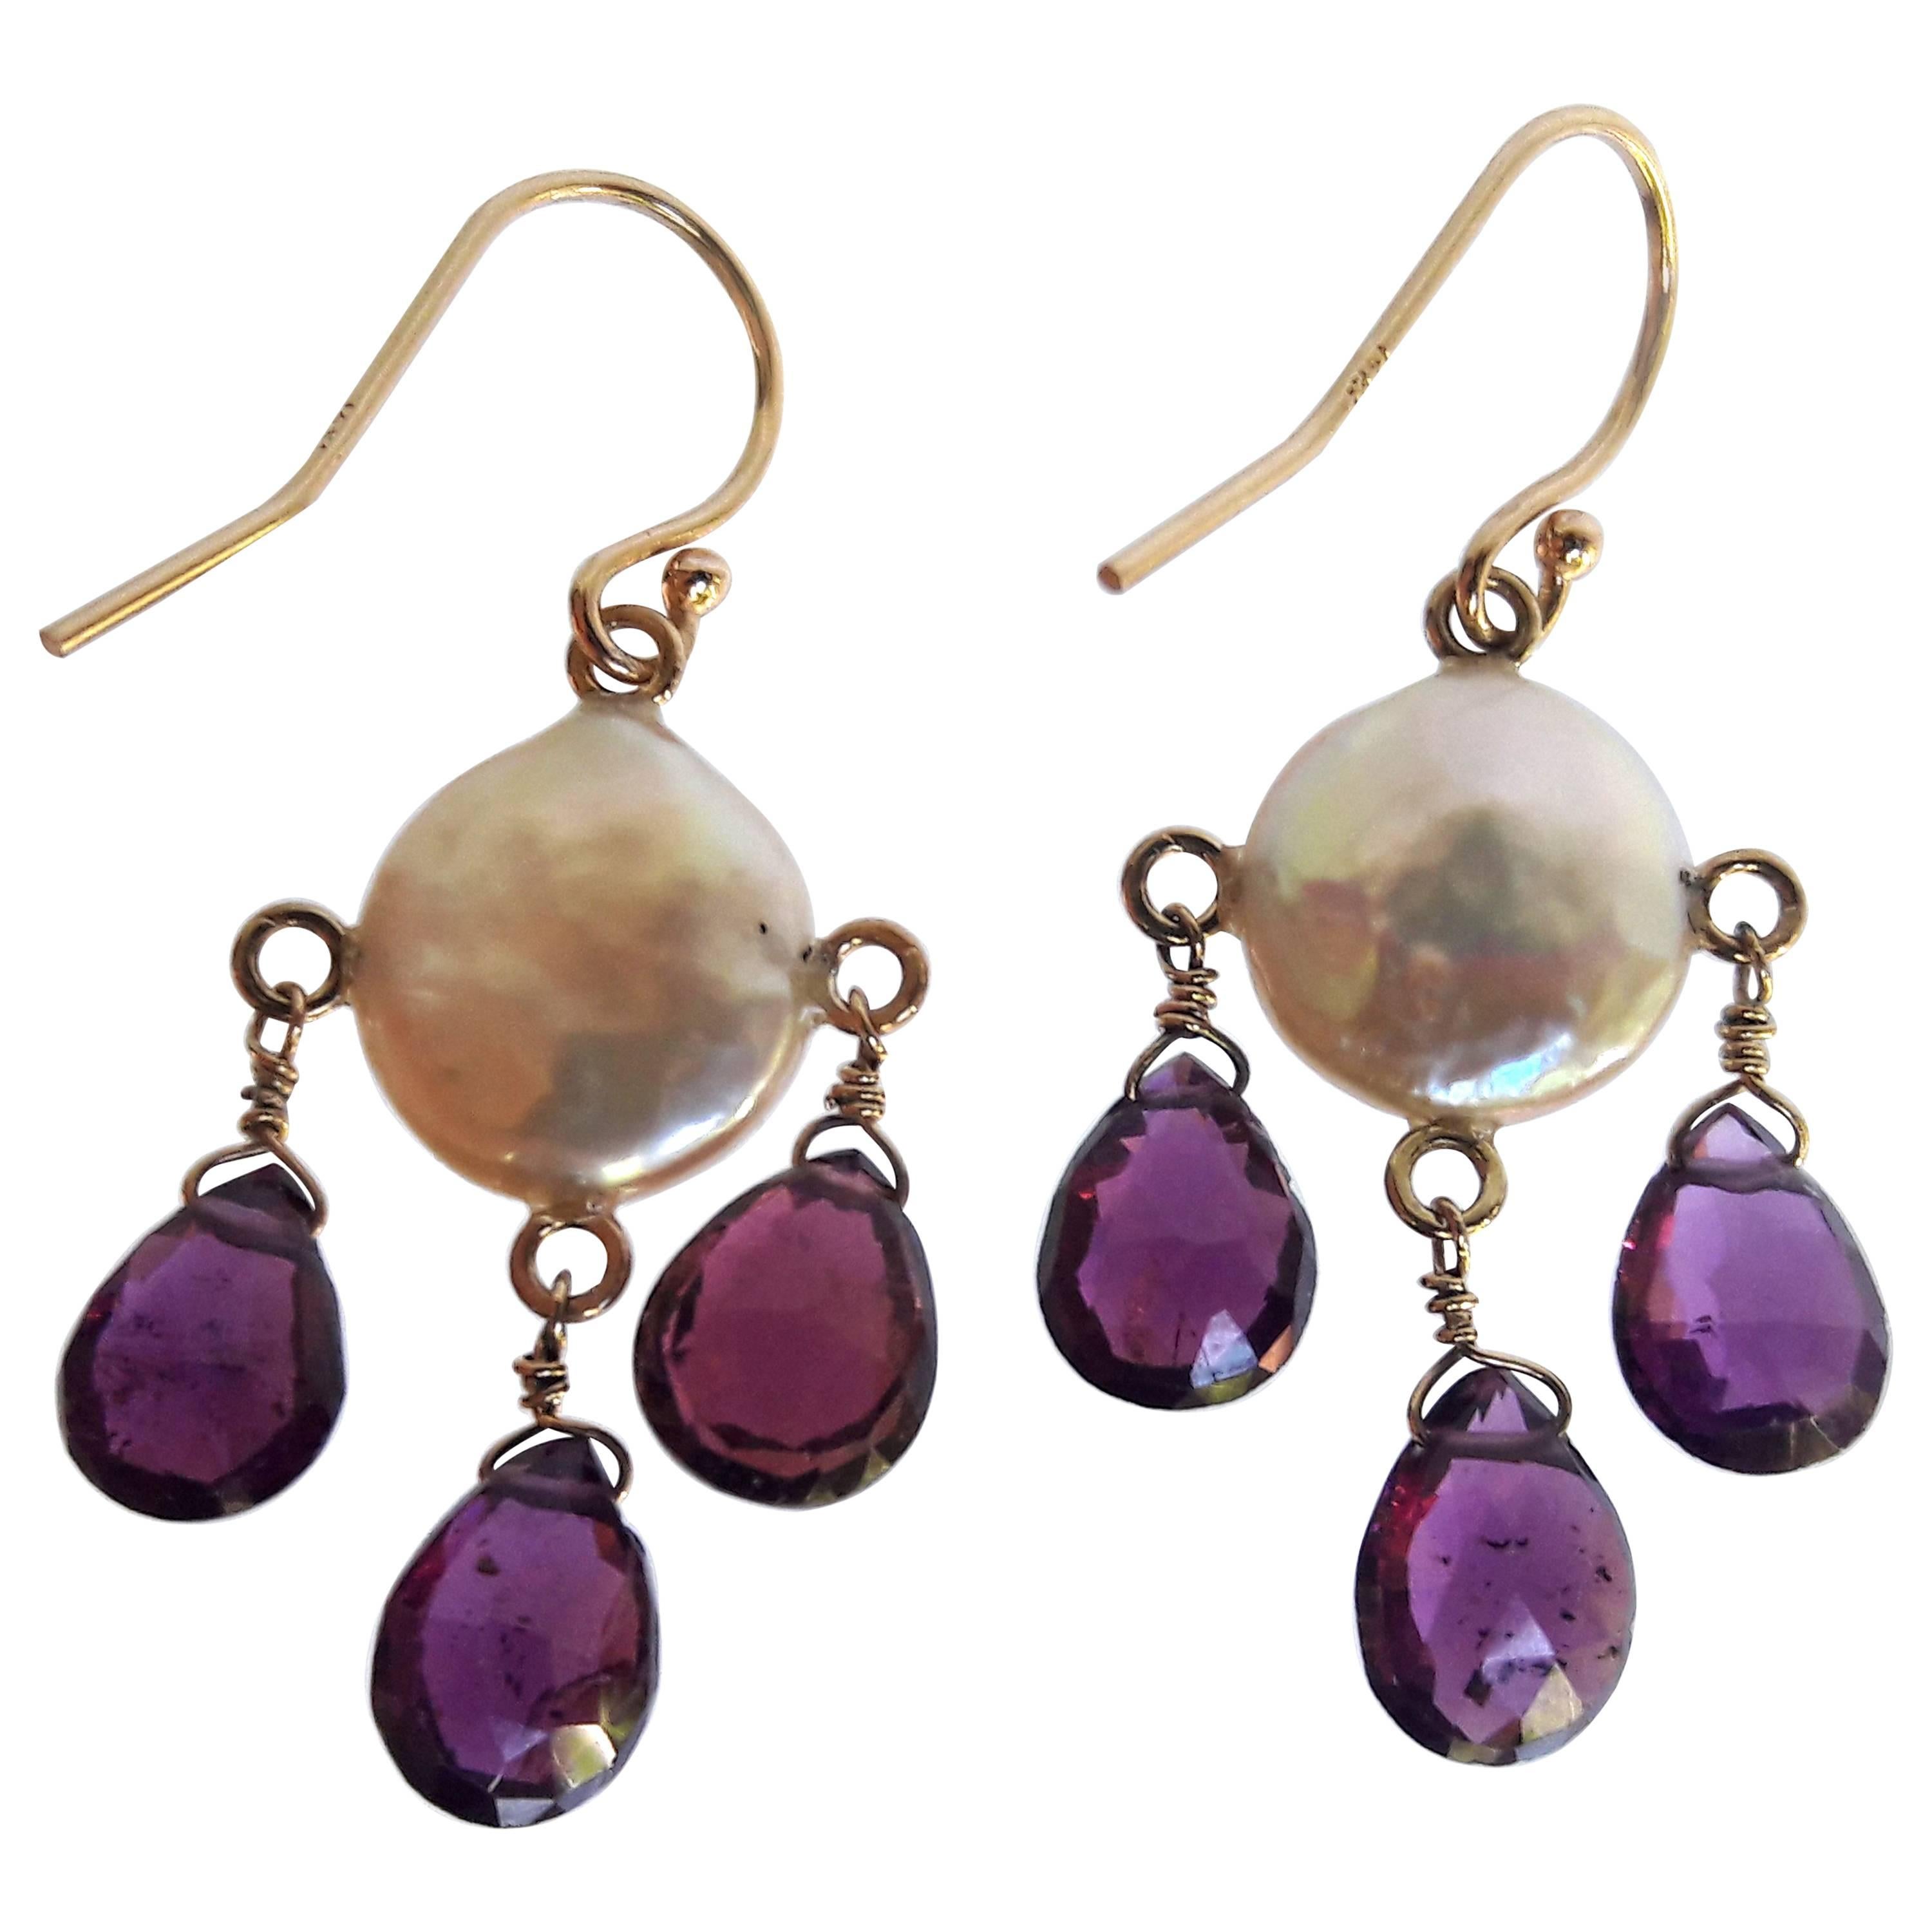 Marina J White Coin Pearl and Tourmaline Teardrop with 14K Yellow Gold Earrings